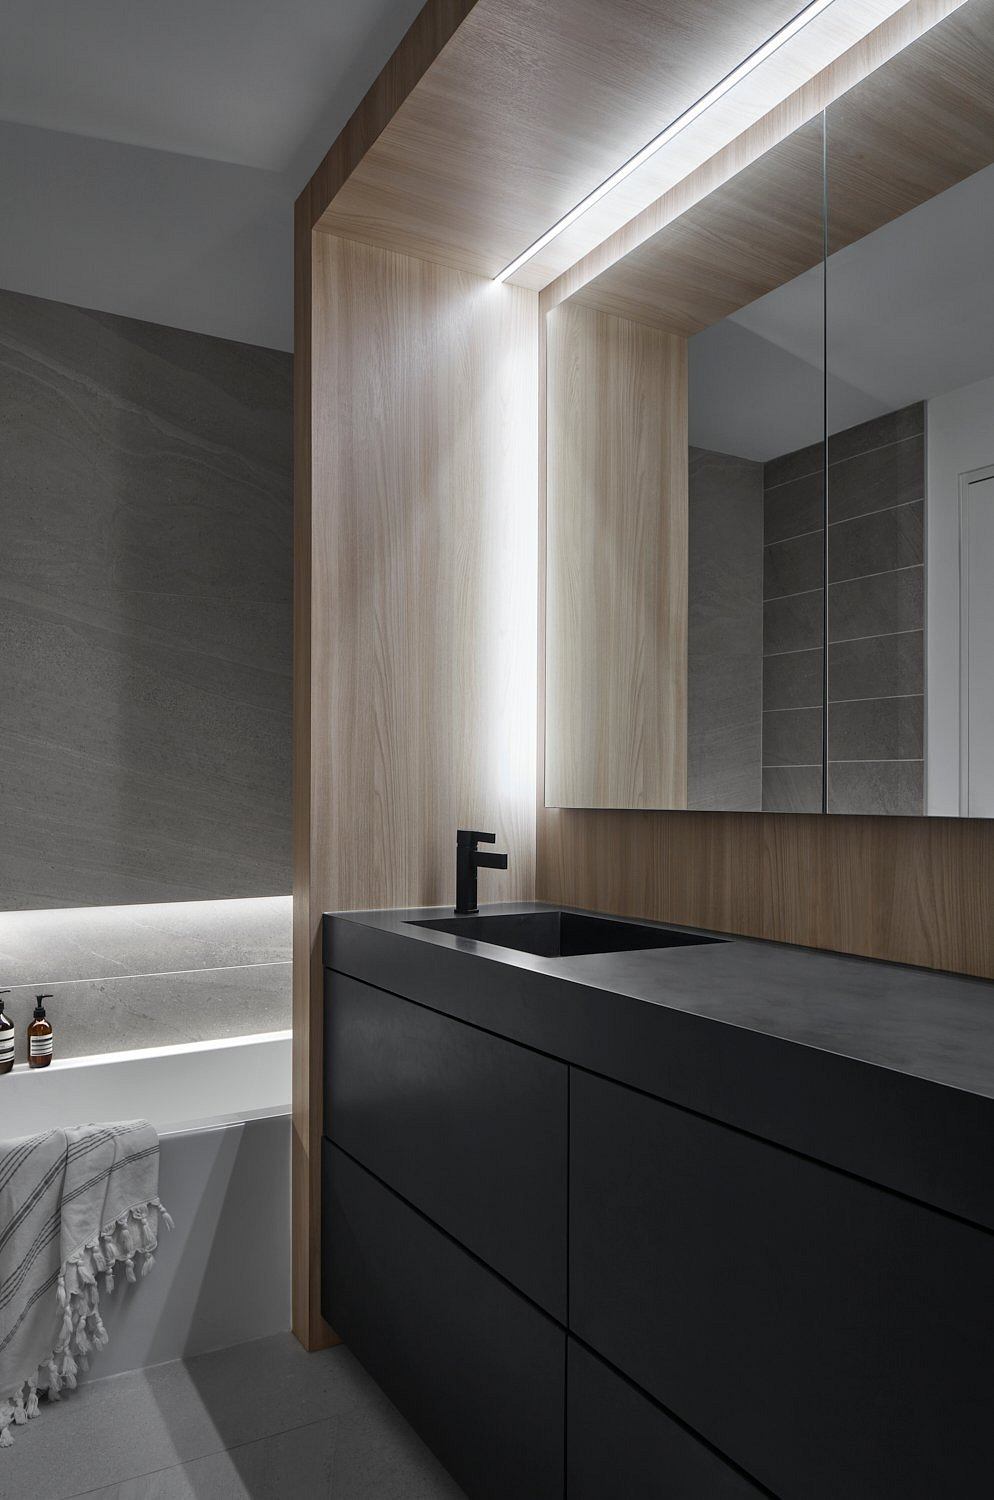 Modern bathroom with sleek black vanity and wooden accents.